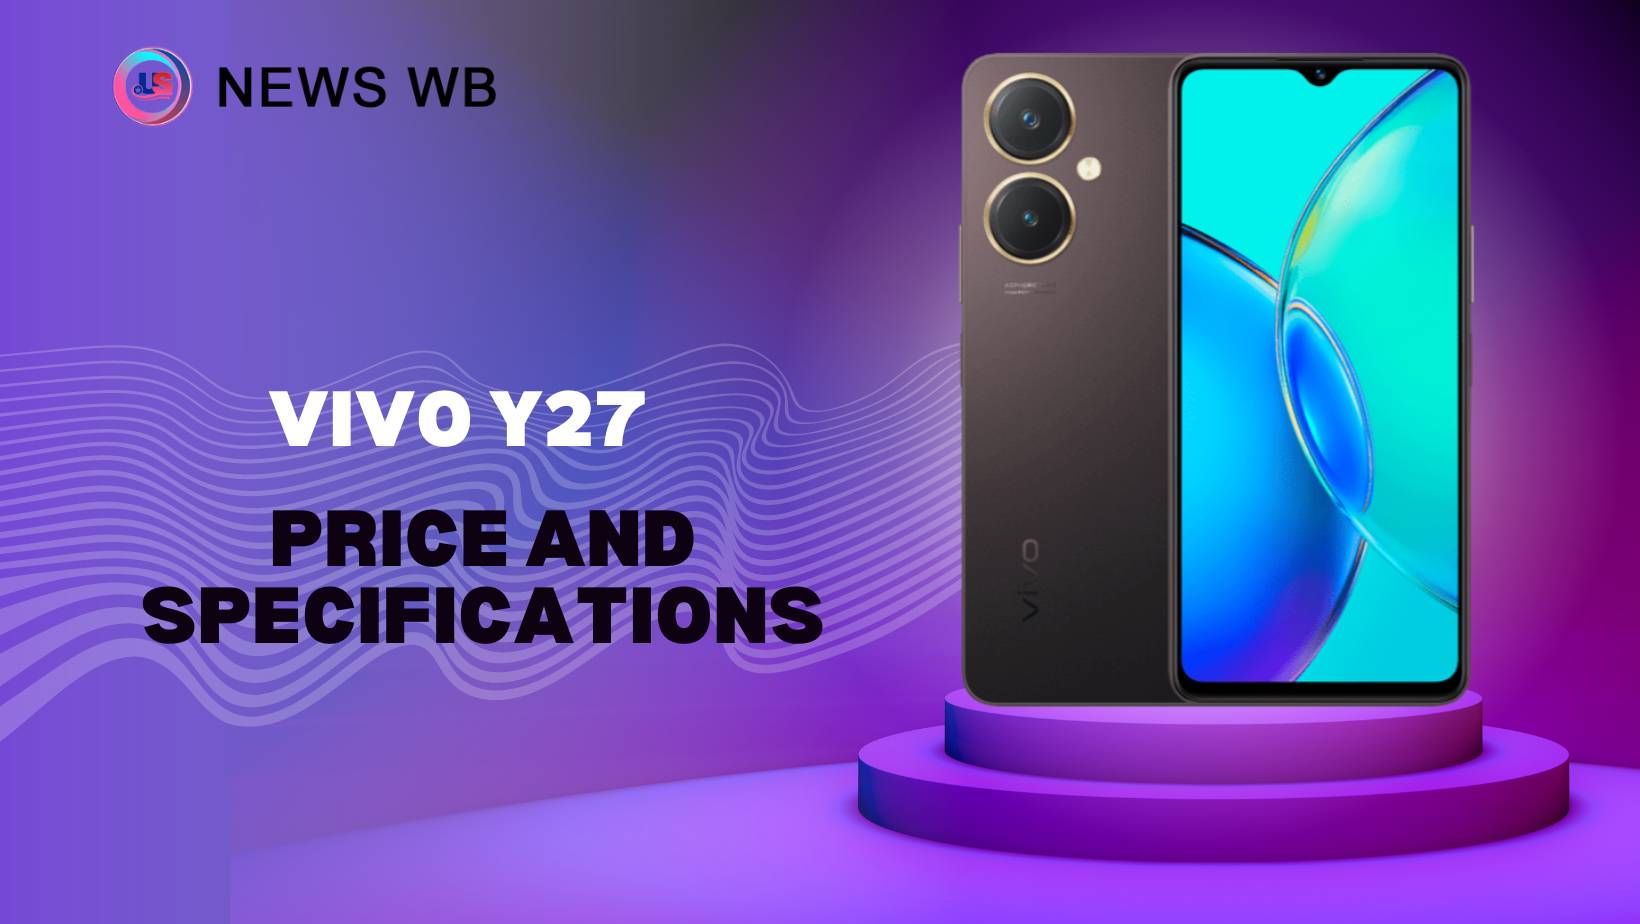 Vivo Y27 Price and Specifications